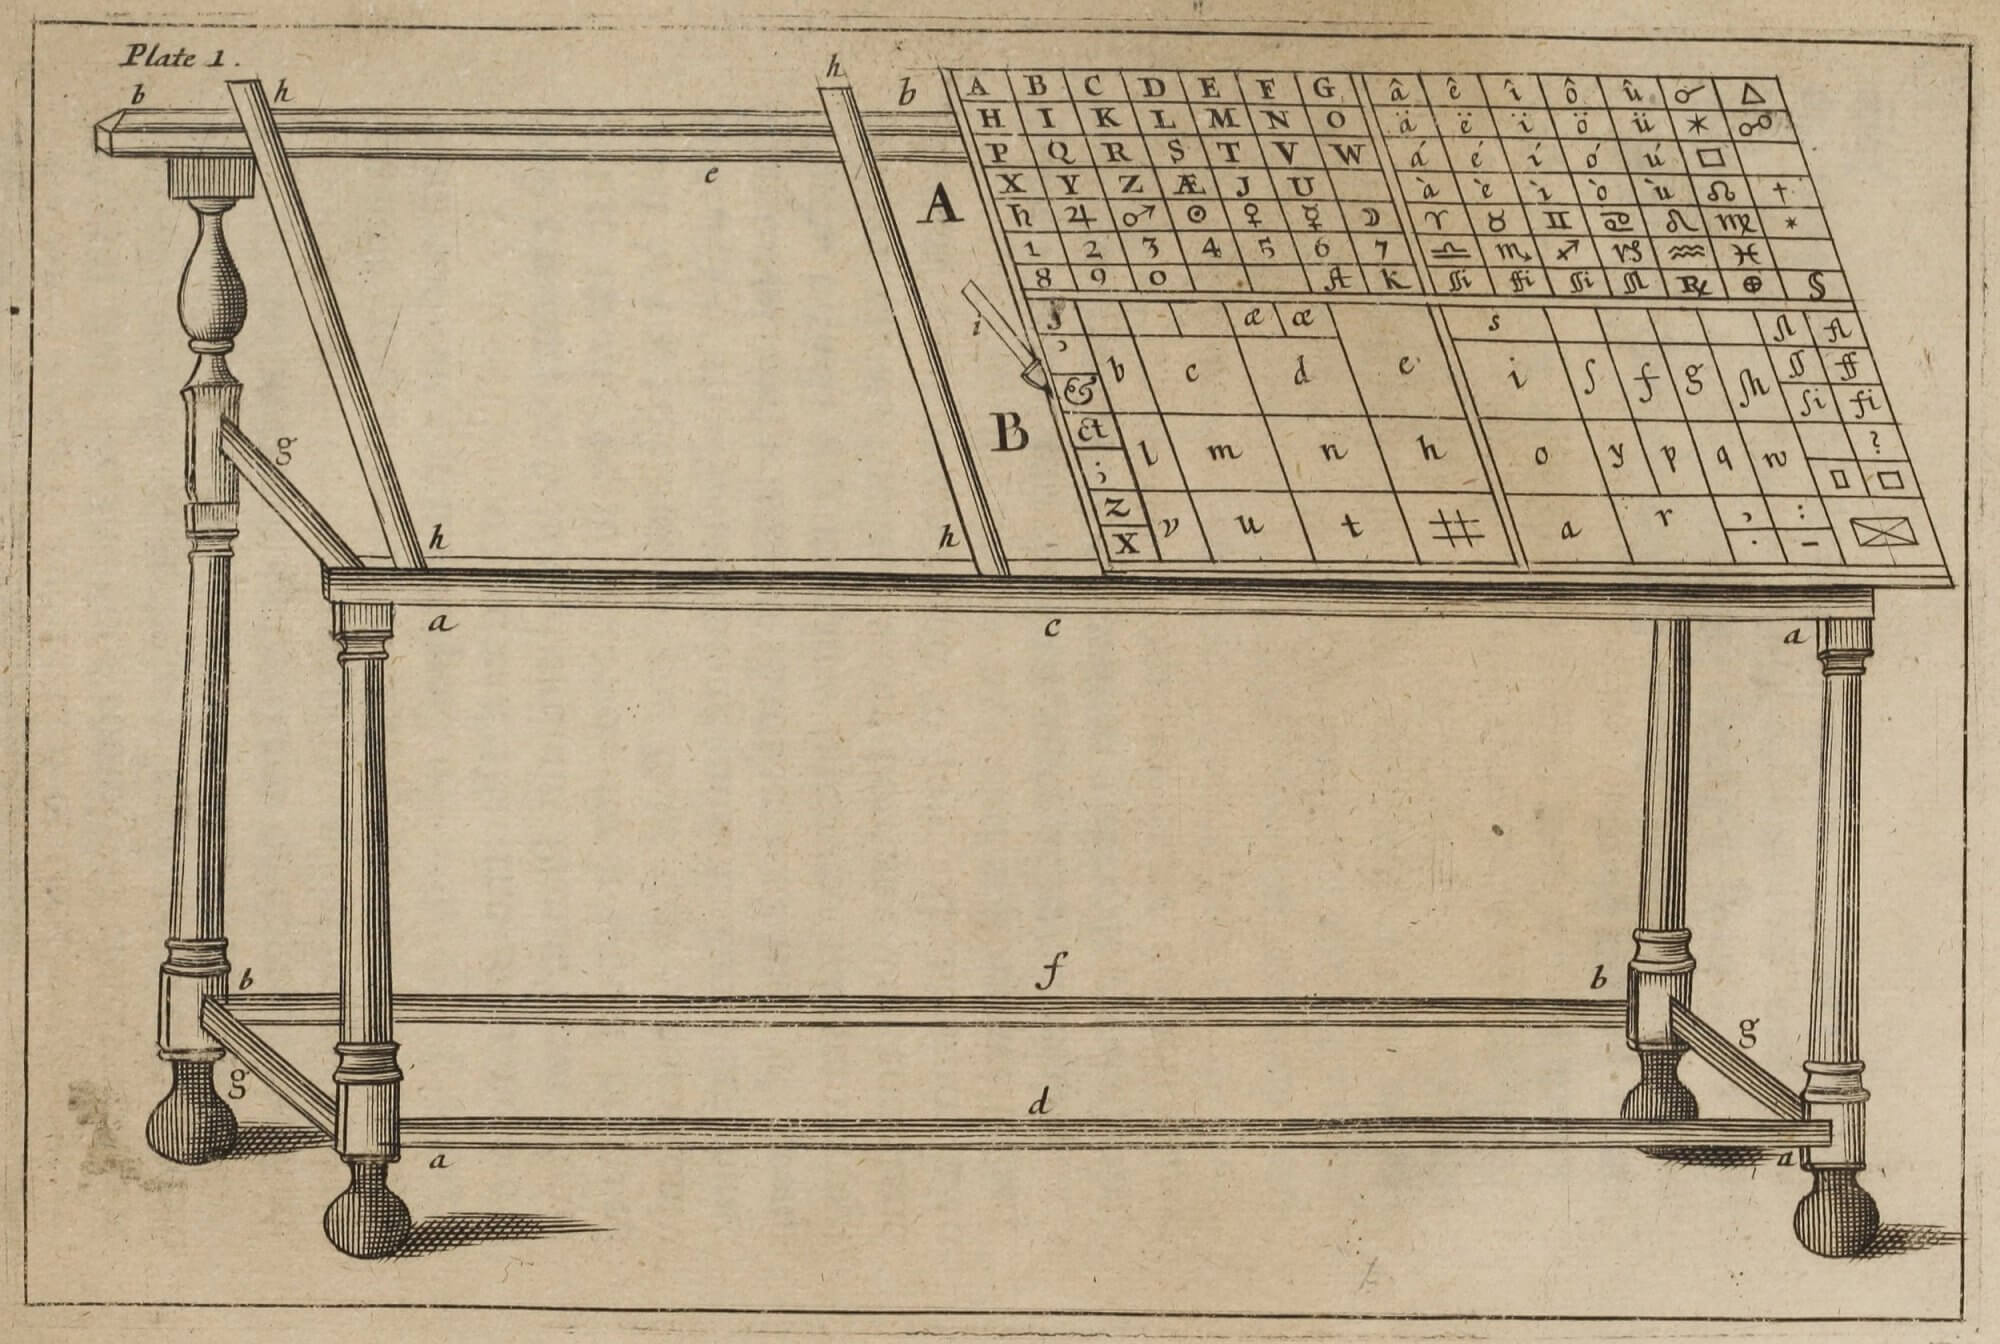 This illustration shows the standard layout of a pair of 17th-century type cases. Individual sorts (or categories of type) would go in the appropriately labeled boxes; although it's hard to tell from this picture, there are actually two cases shown, an upper case and a lower case.